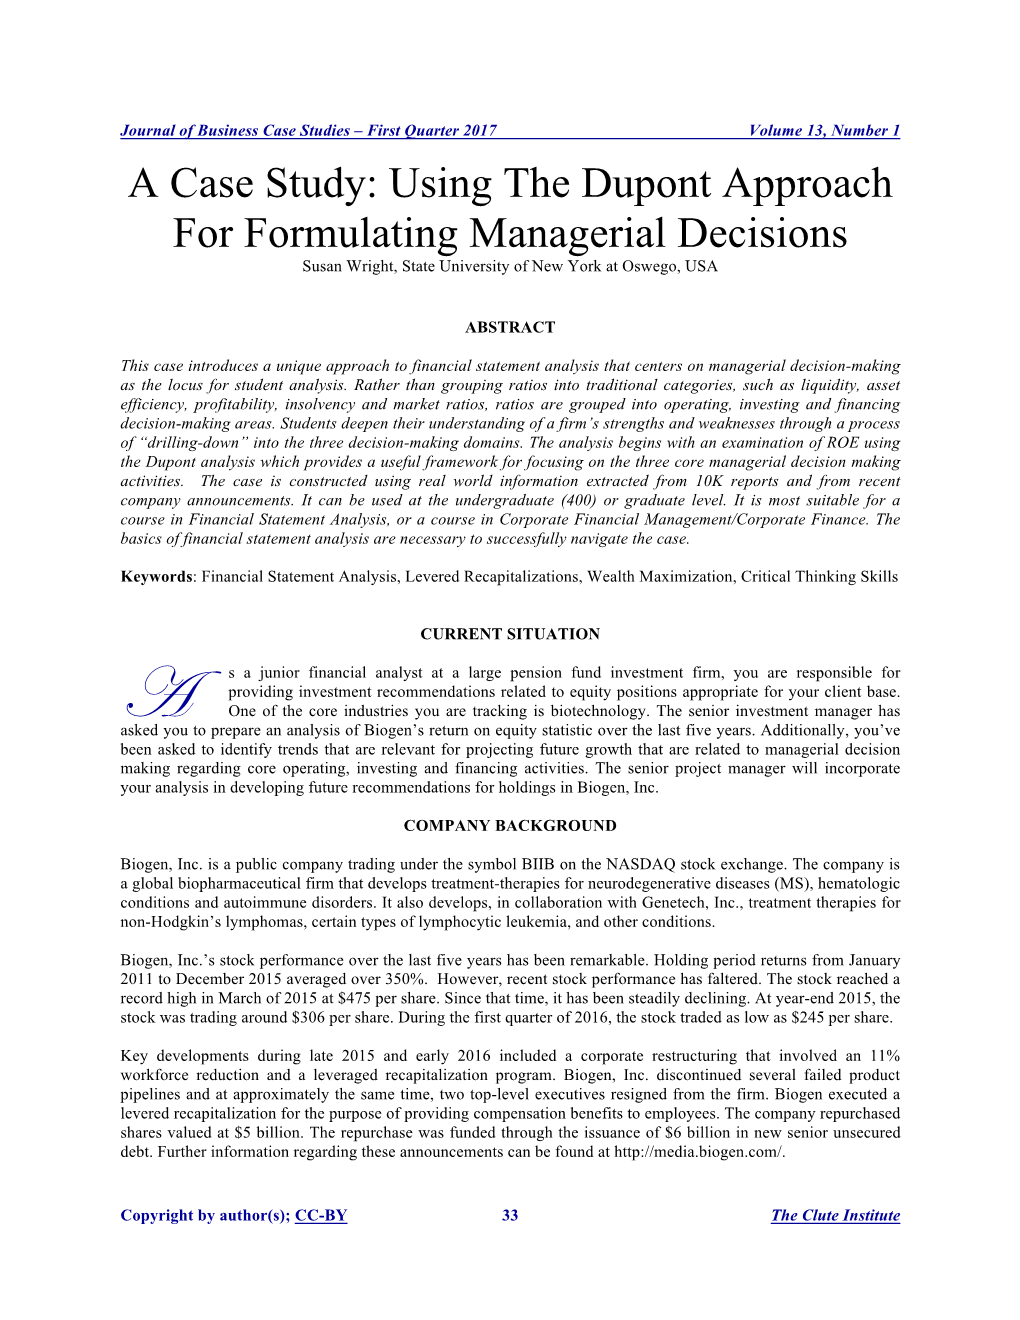 A Case Study: Using the Dupont Approach for Formulating Managerial Decisions Susan Wright, State University of New York at Oswego, USA